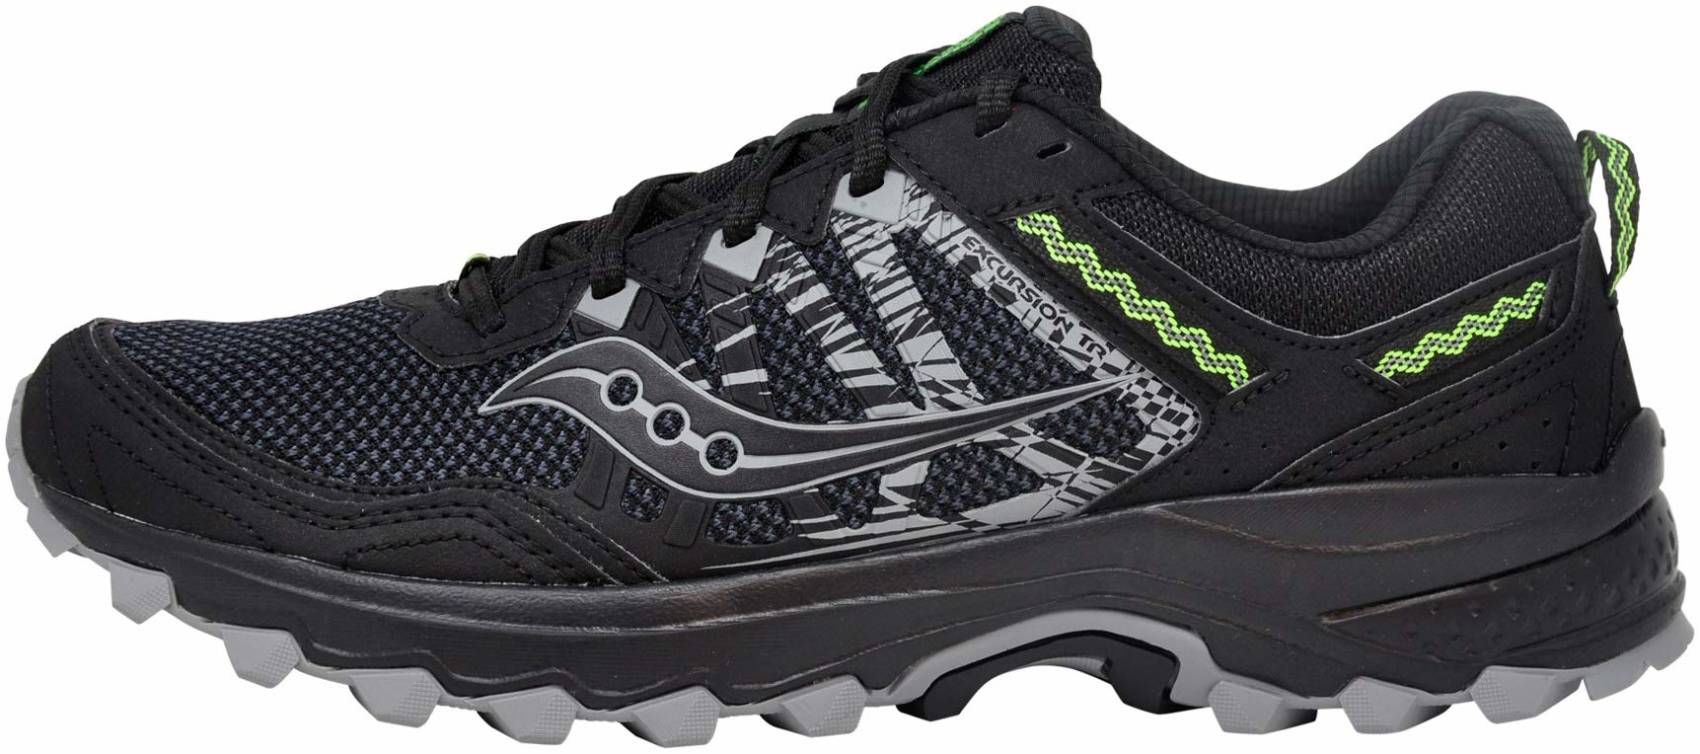 Performance darkness Cyclops Saucony Excursion TR 12 Review 2023, Facts, Deals ($41) | RunRepeat